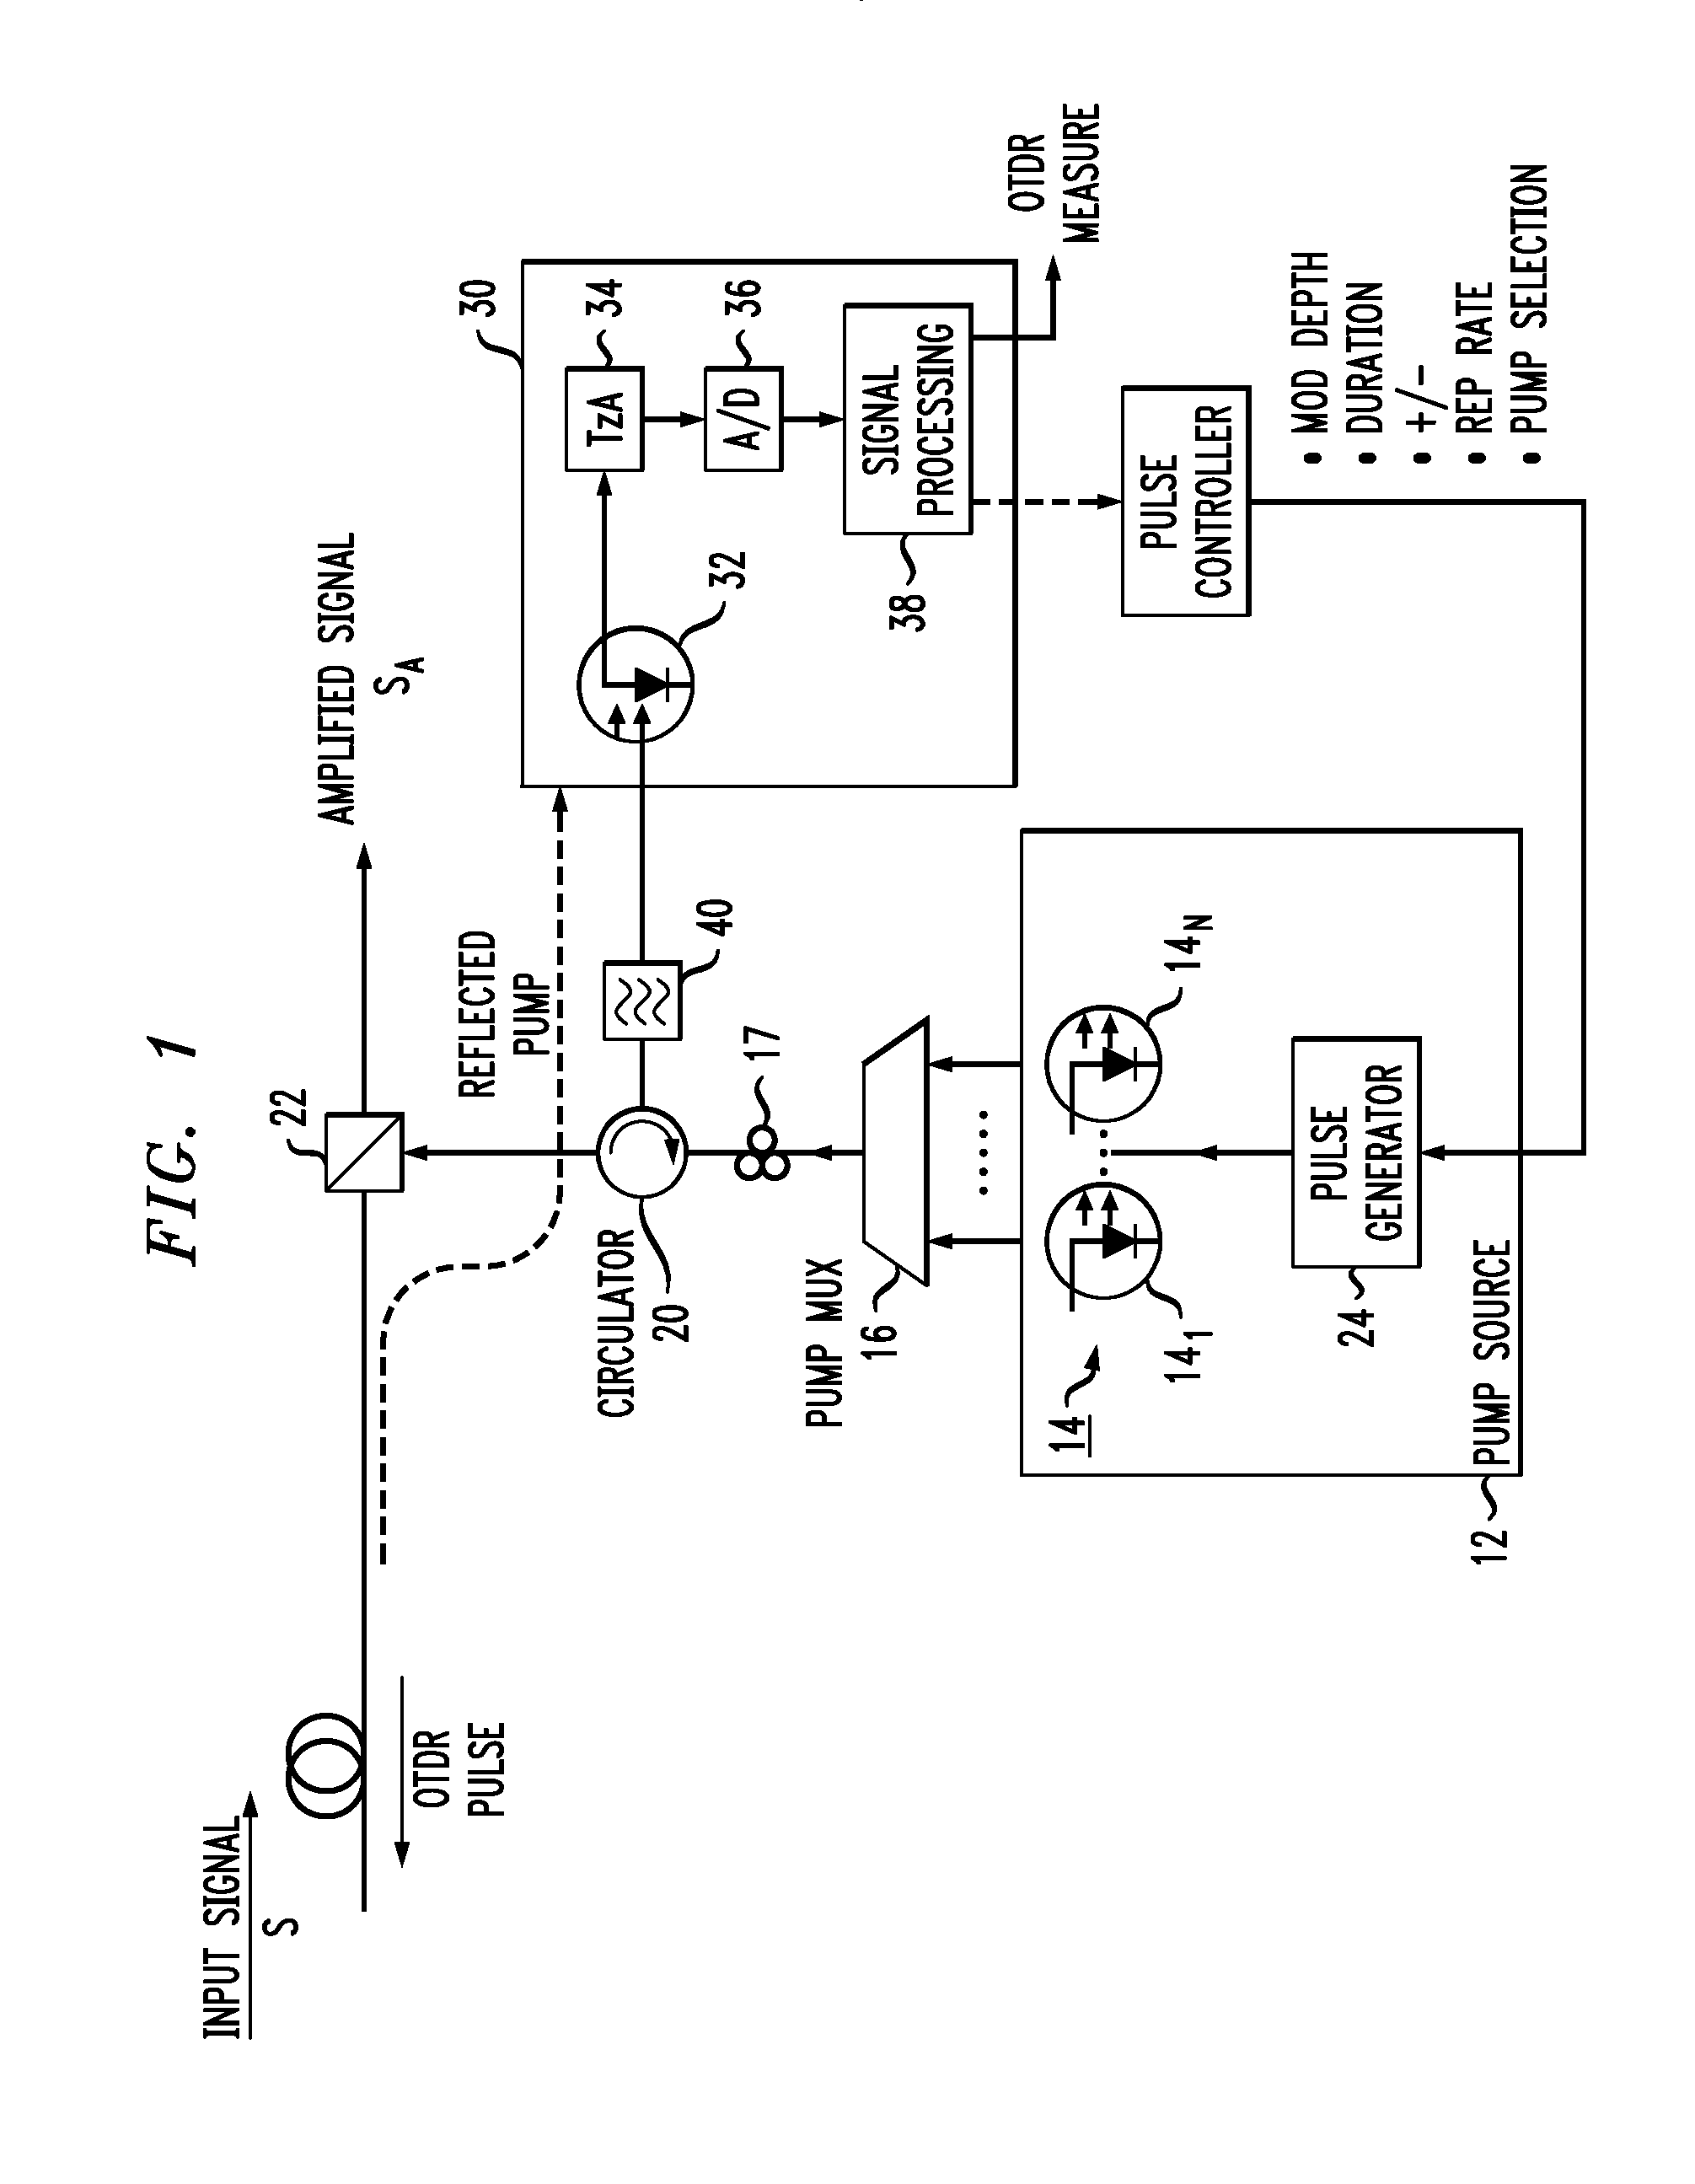 In-Service Optical Time Domain Reflectometry Utilizing Raman Pump Source